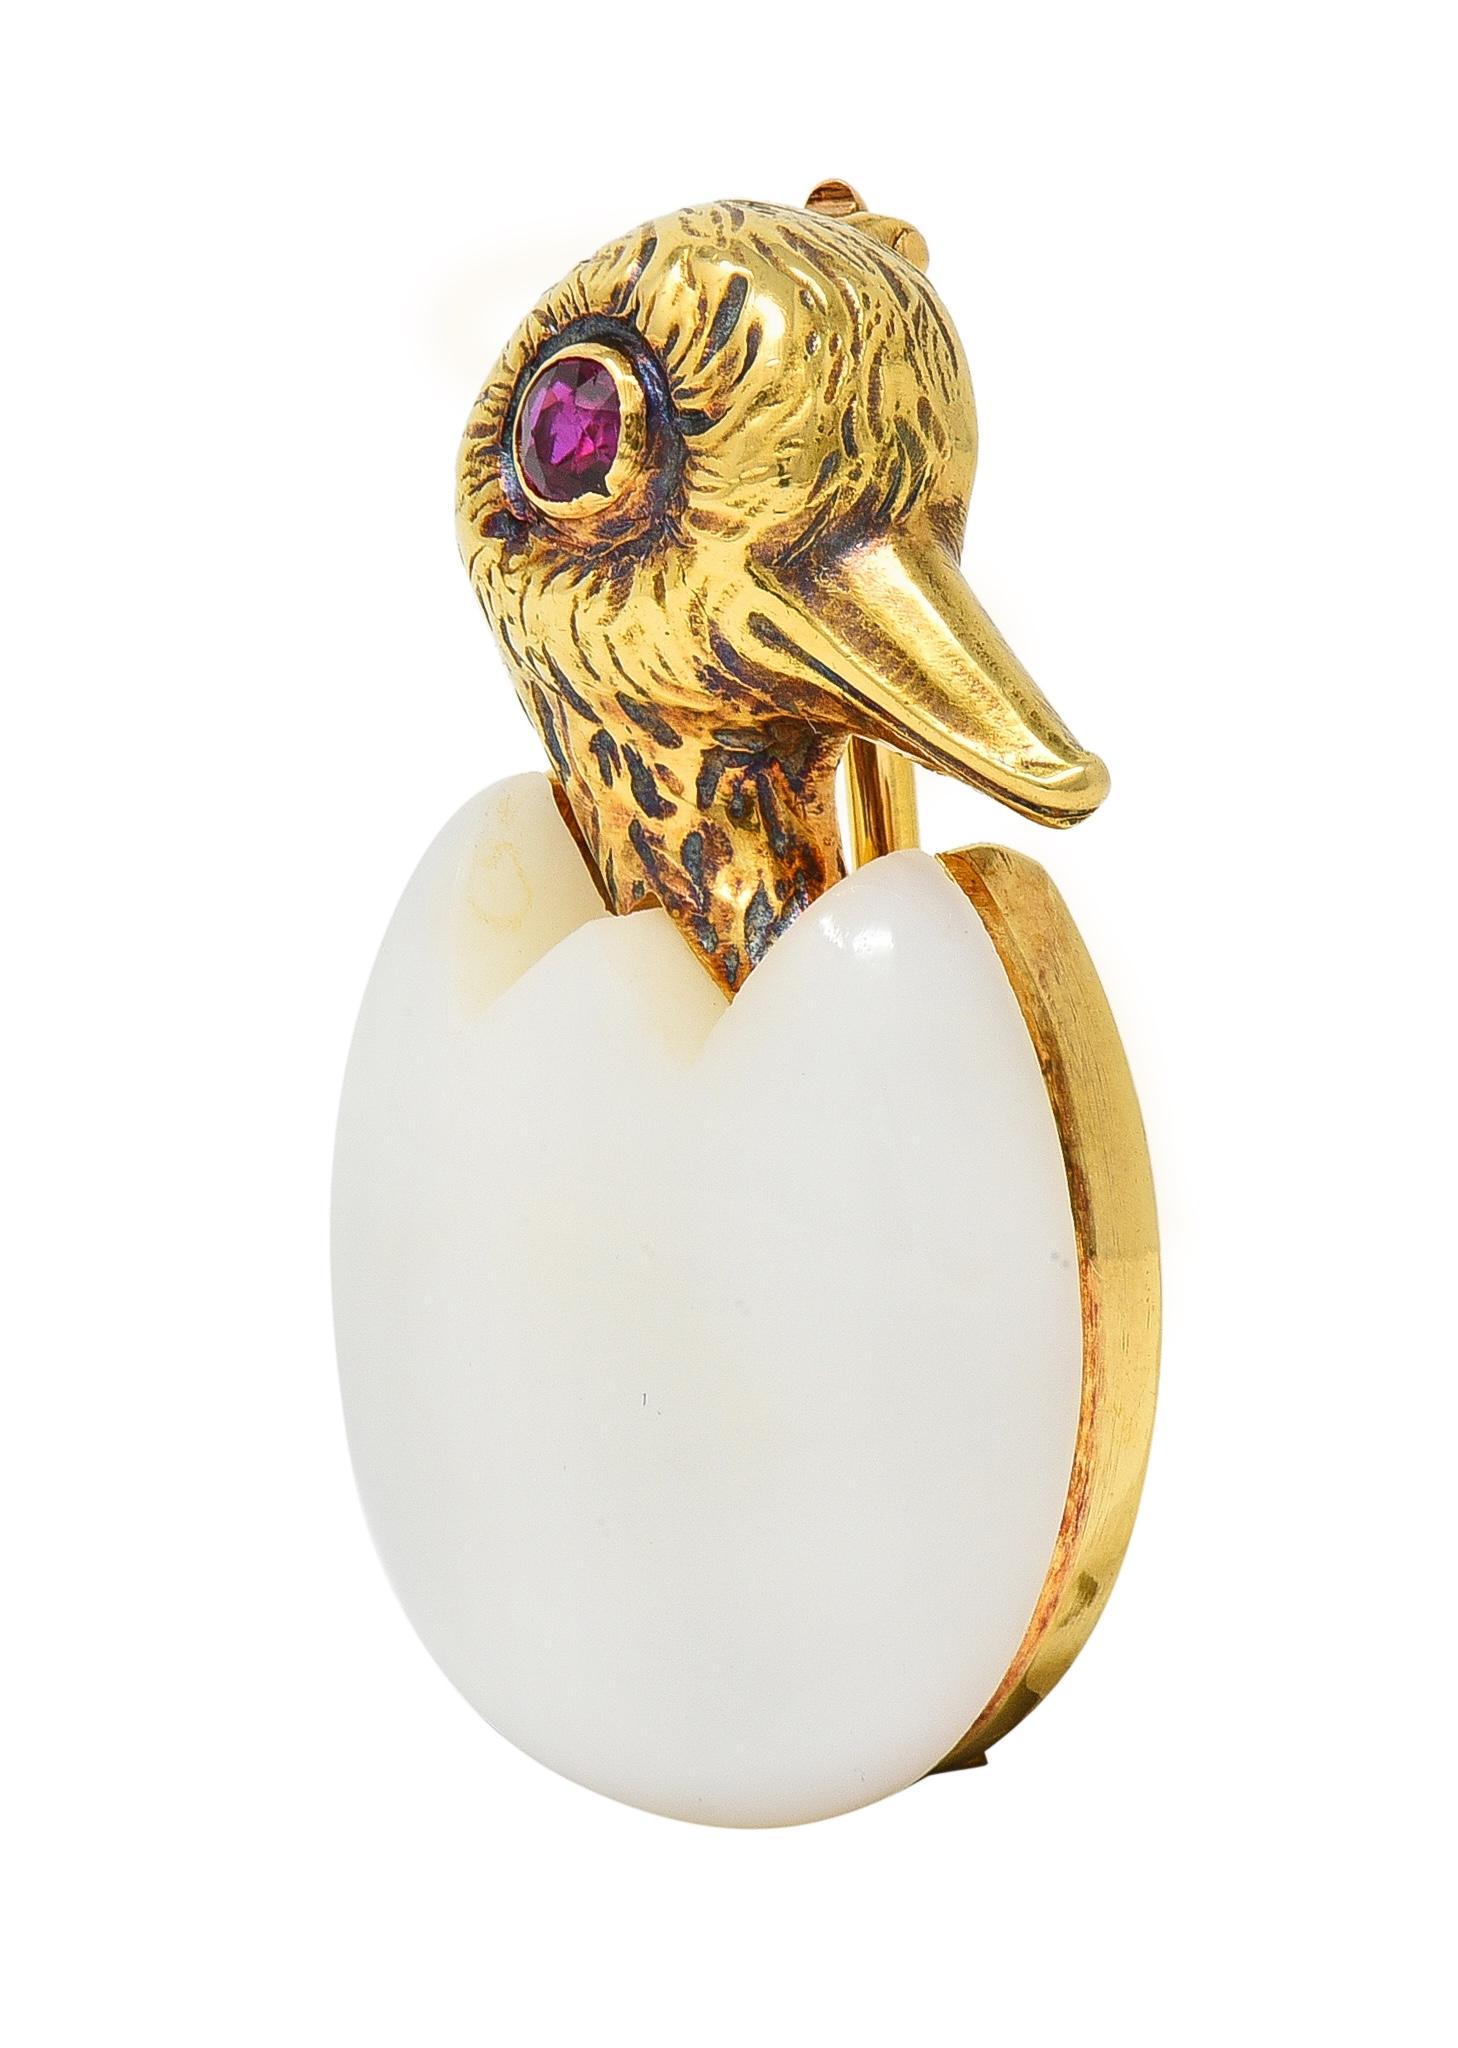 Designed as a stylized gold bird hatching from a carved chalcedony egg
Translucent white in body color - measuring 18.5 x 20.0 mm 
Accented by engraved feather textured head and ruby eye
Round cut and weighing approximately 0.18 carat